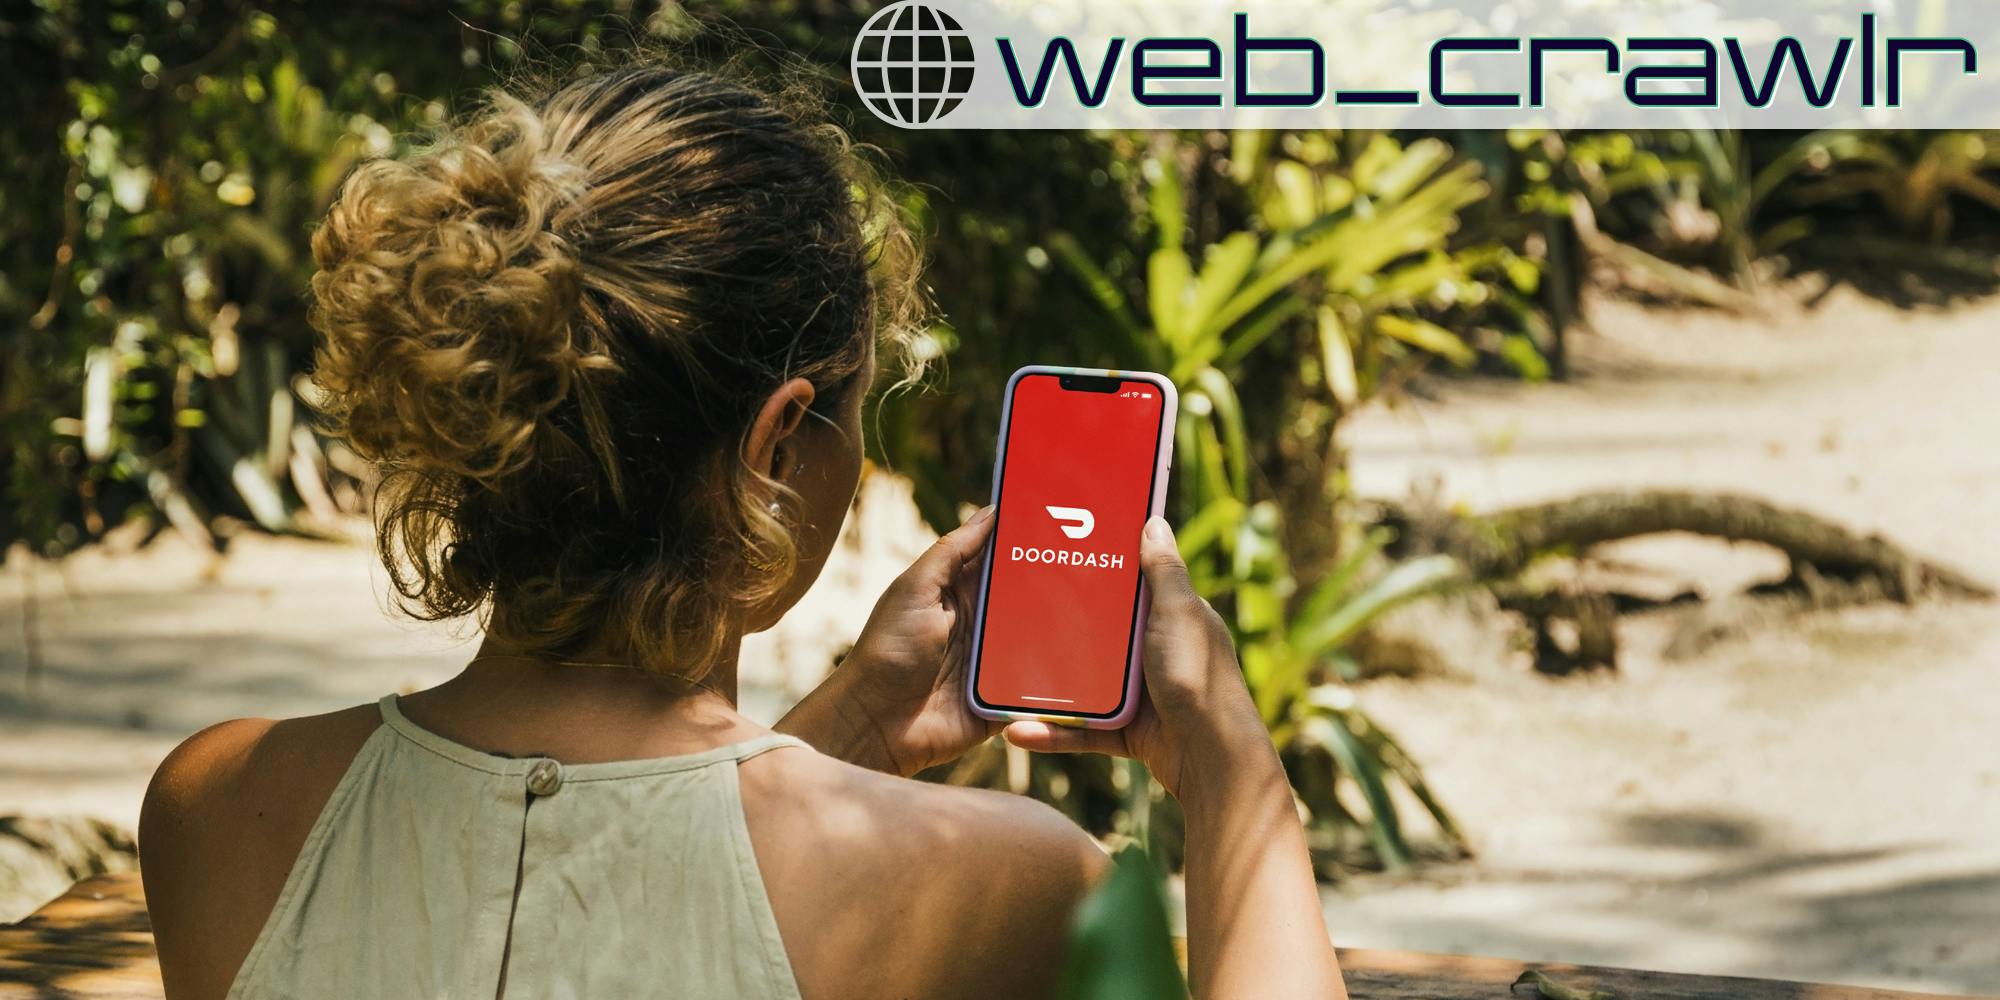 A woman holding a smartphone with the DoorDash logo on it. The Daily Dot newsletter web_crawlr logo is in the top right corner.